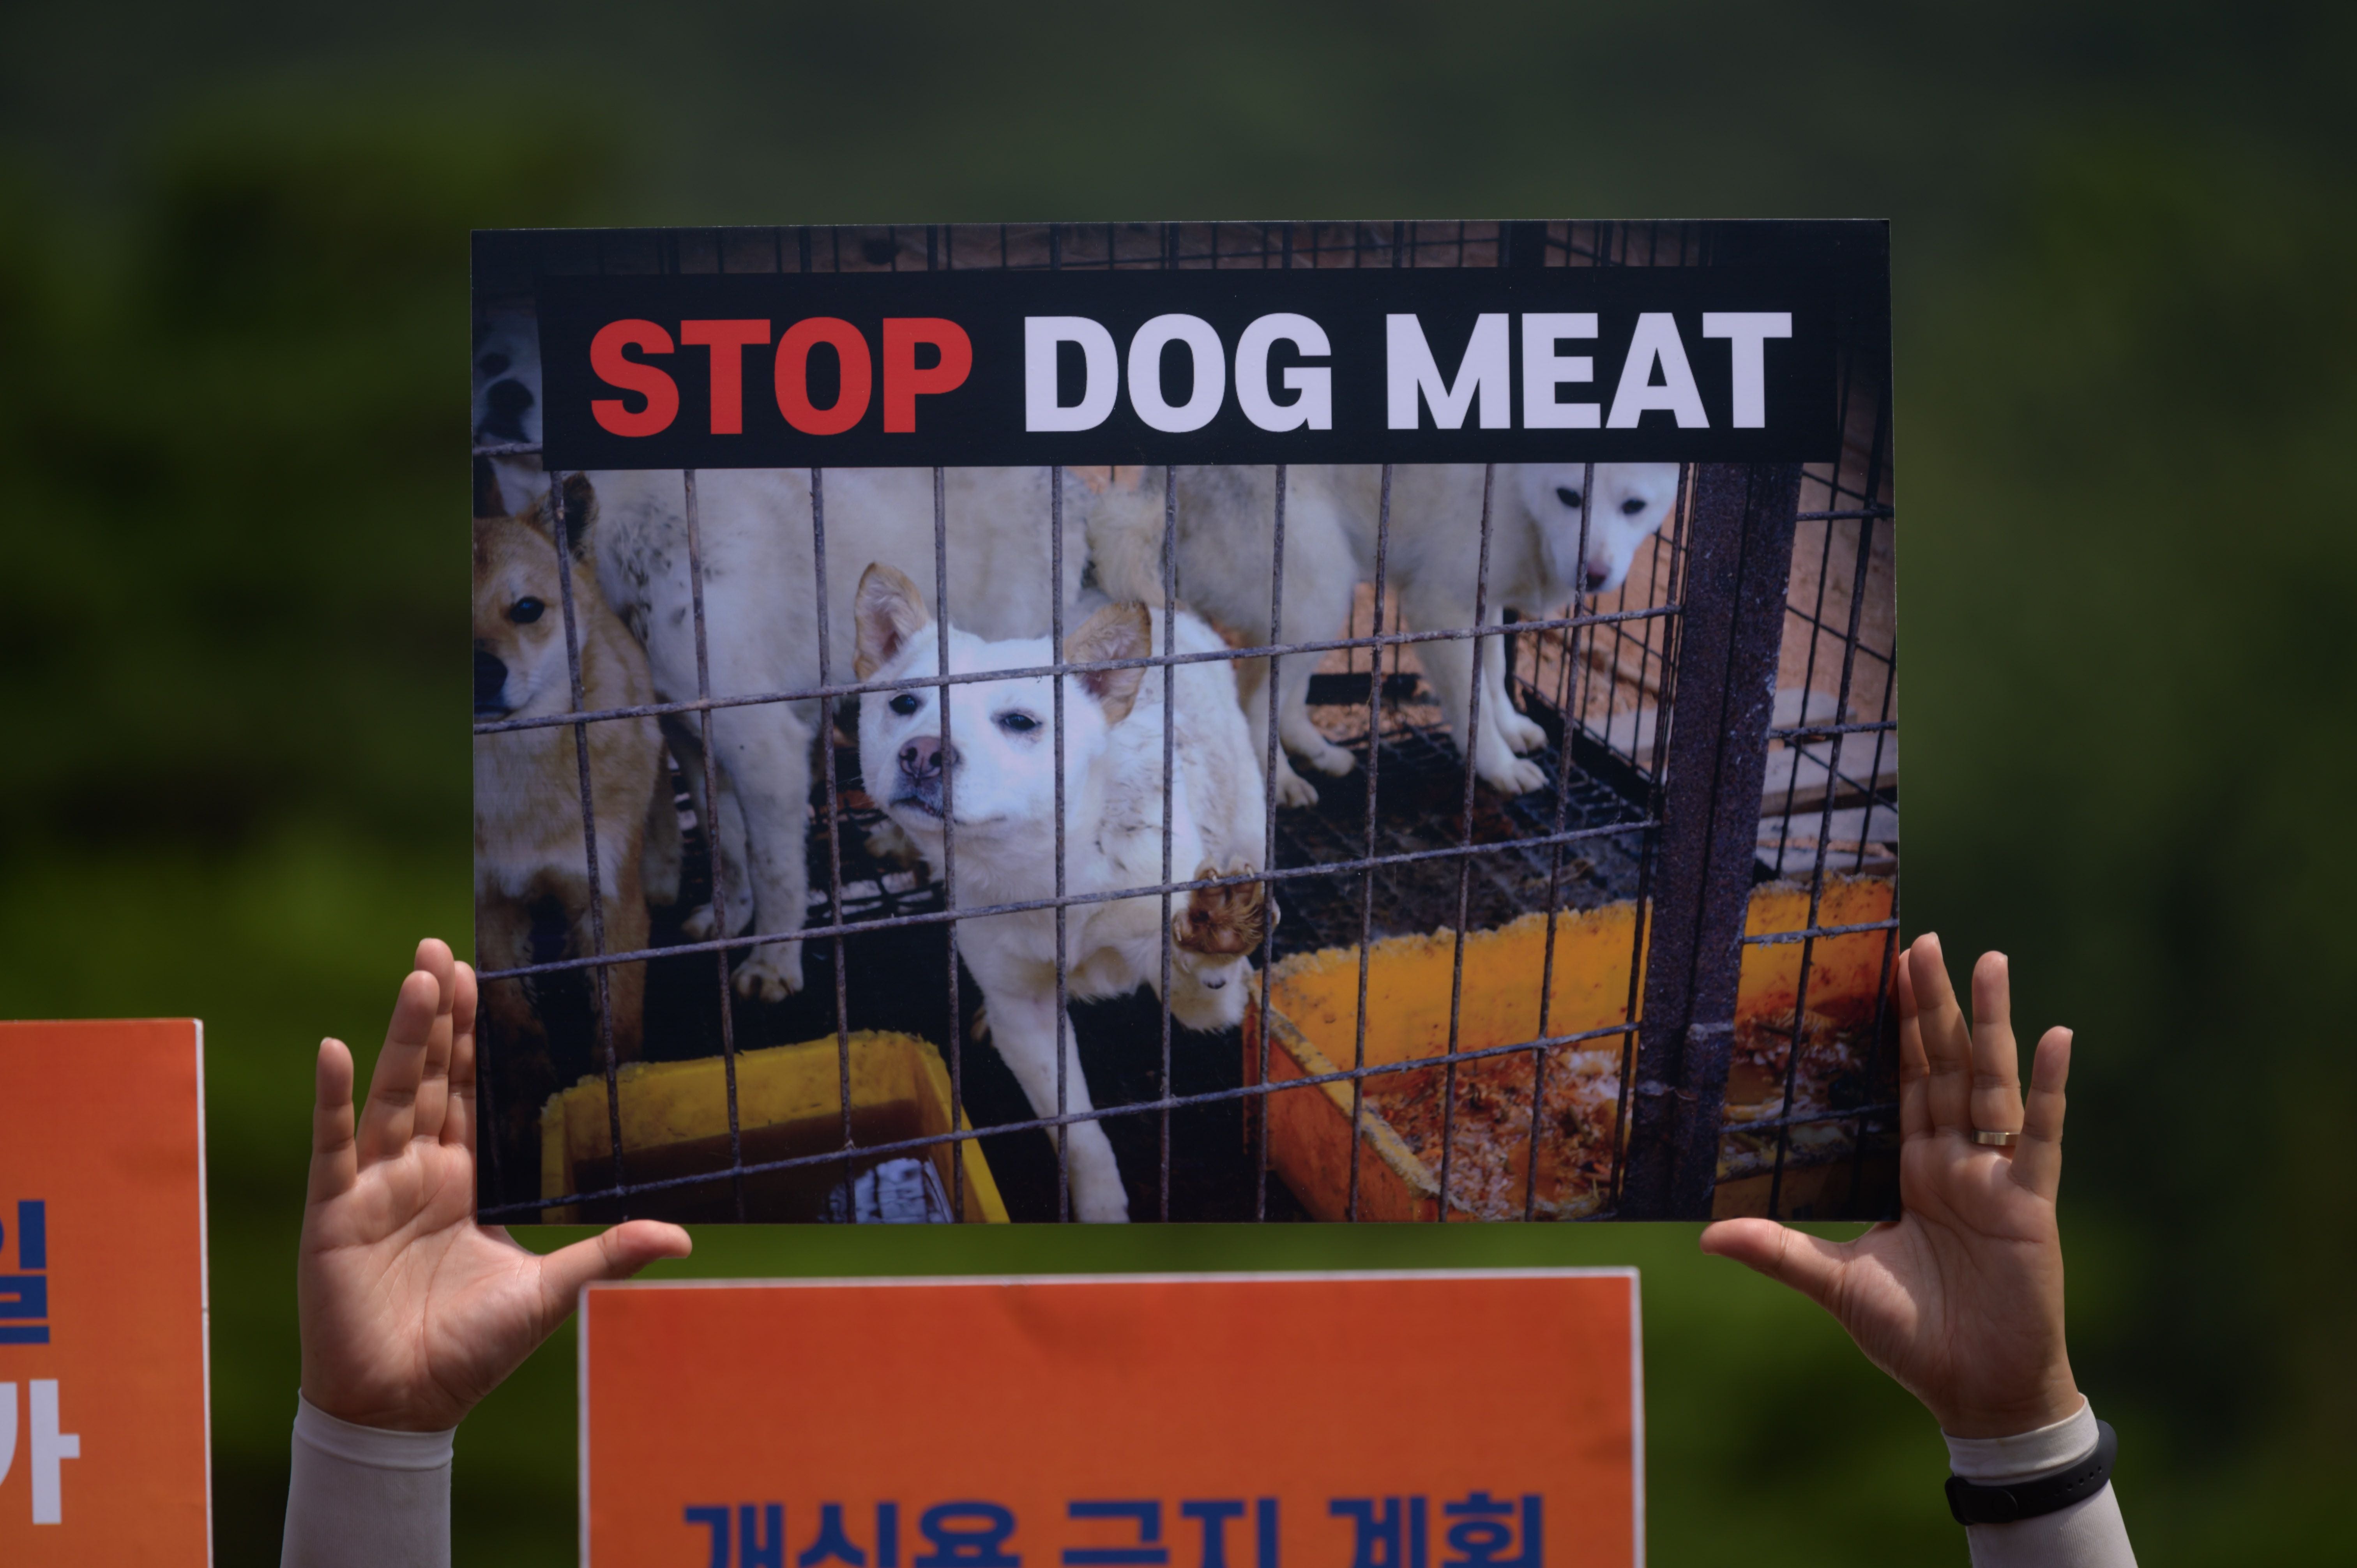 Protests against dog meat have been increasing in the country